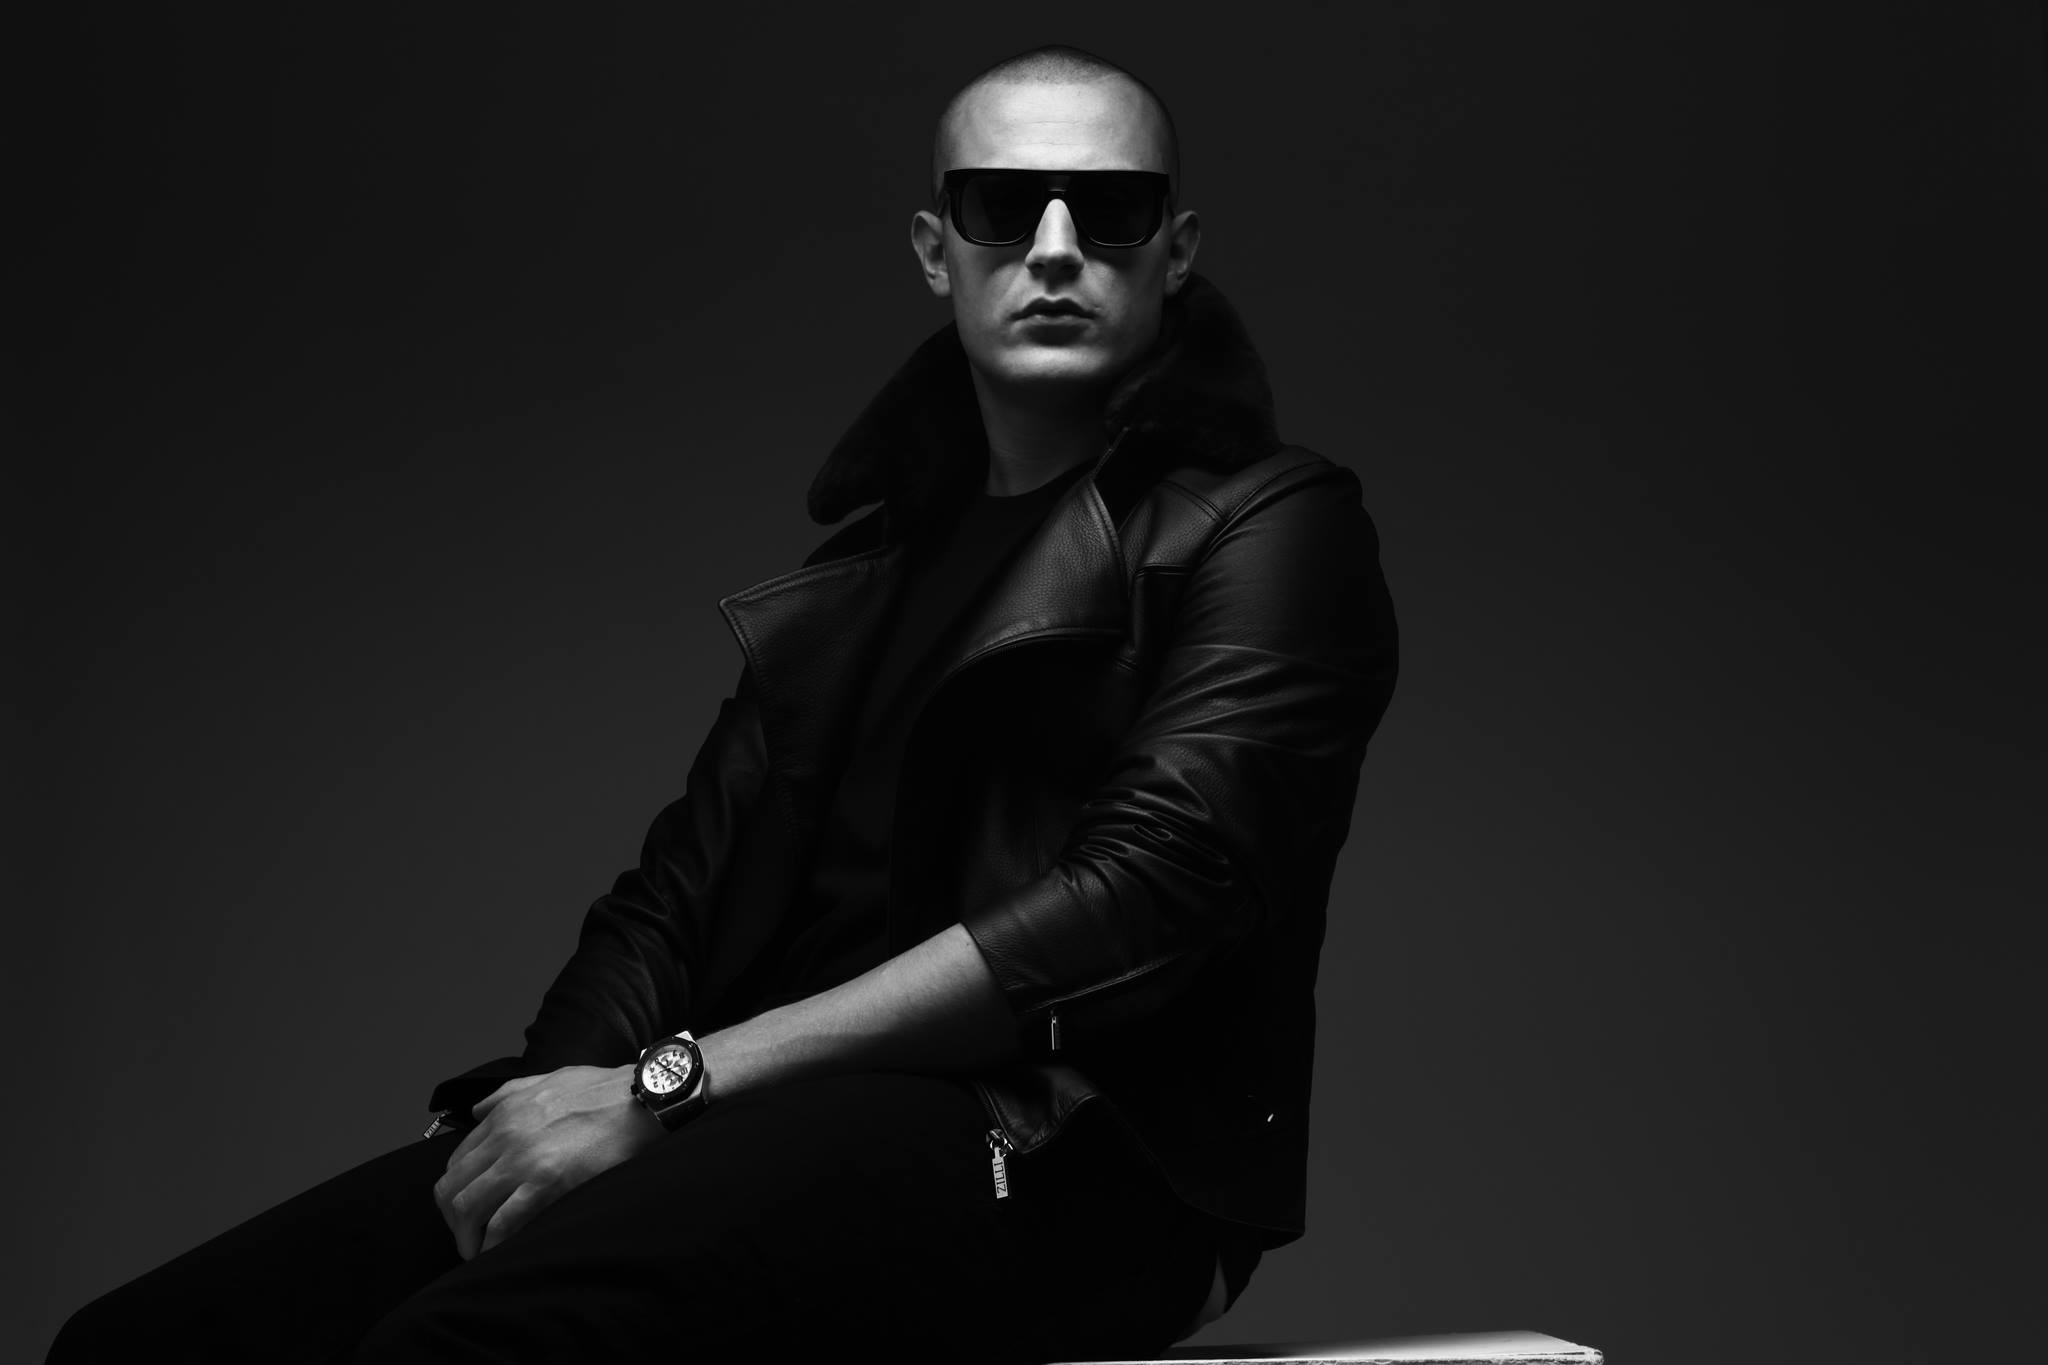 DJ Snake wallpapers, Captivating visuals, Striking backgrounds, Music-themed imagery, 2050x1370 HD Desktop